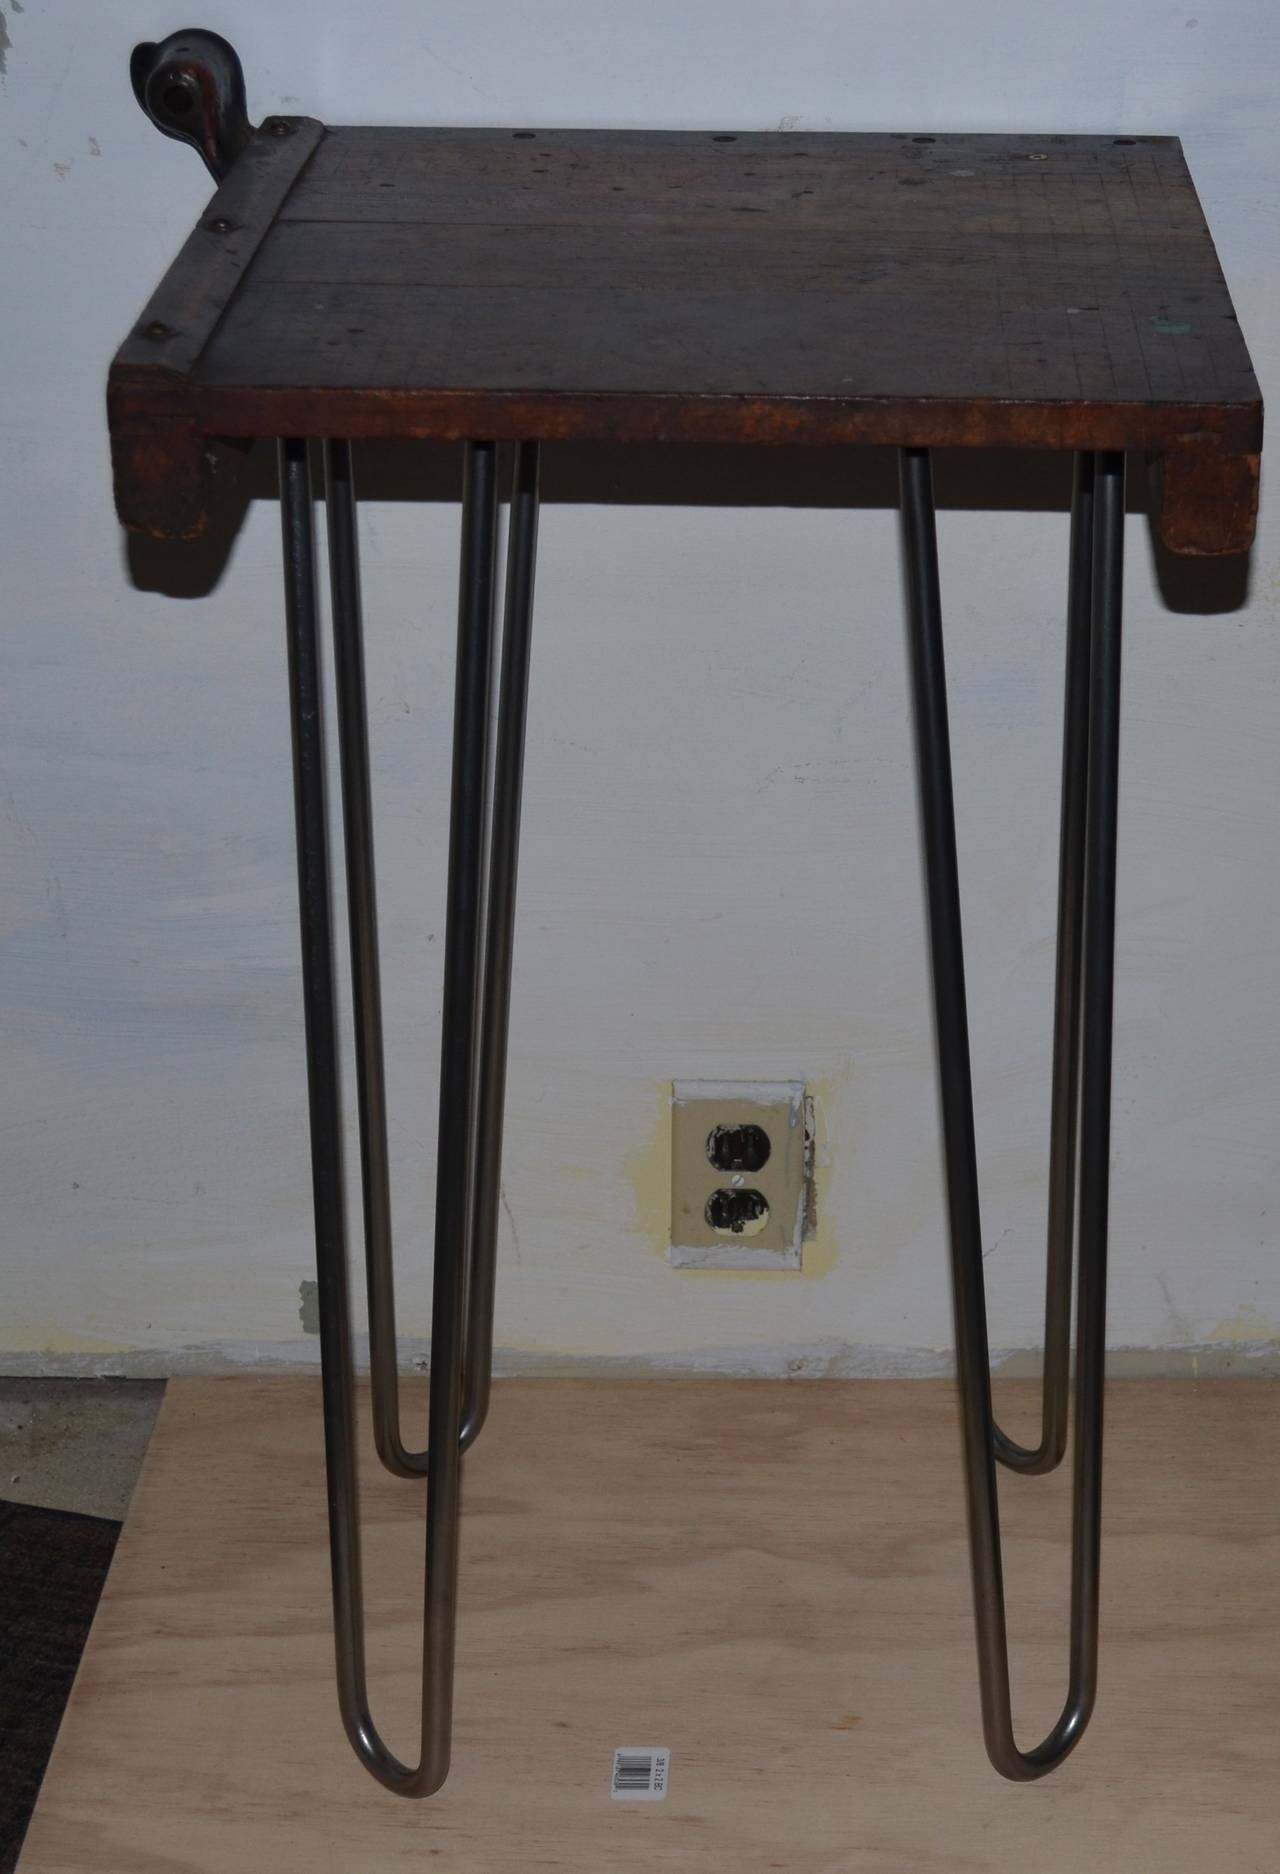 Table from Vintage Paper Cutter Mounted on Hairpin Legs 2